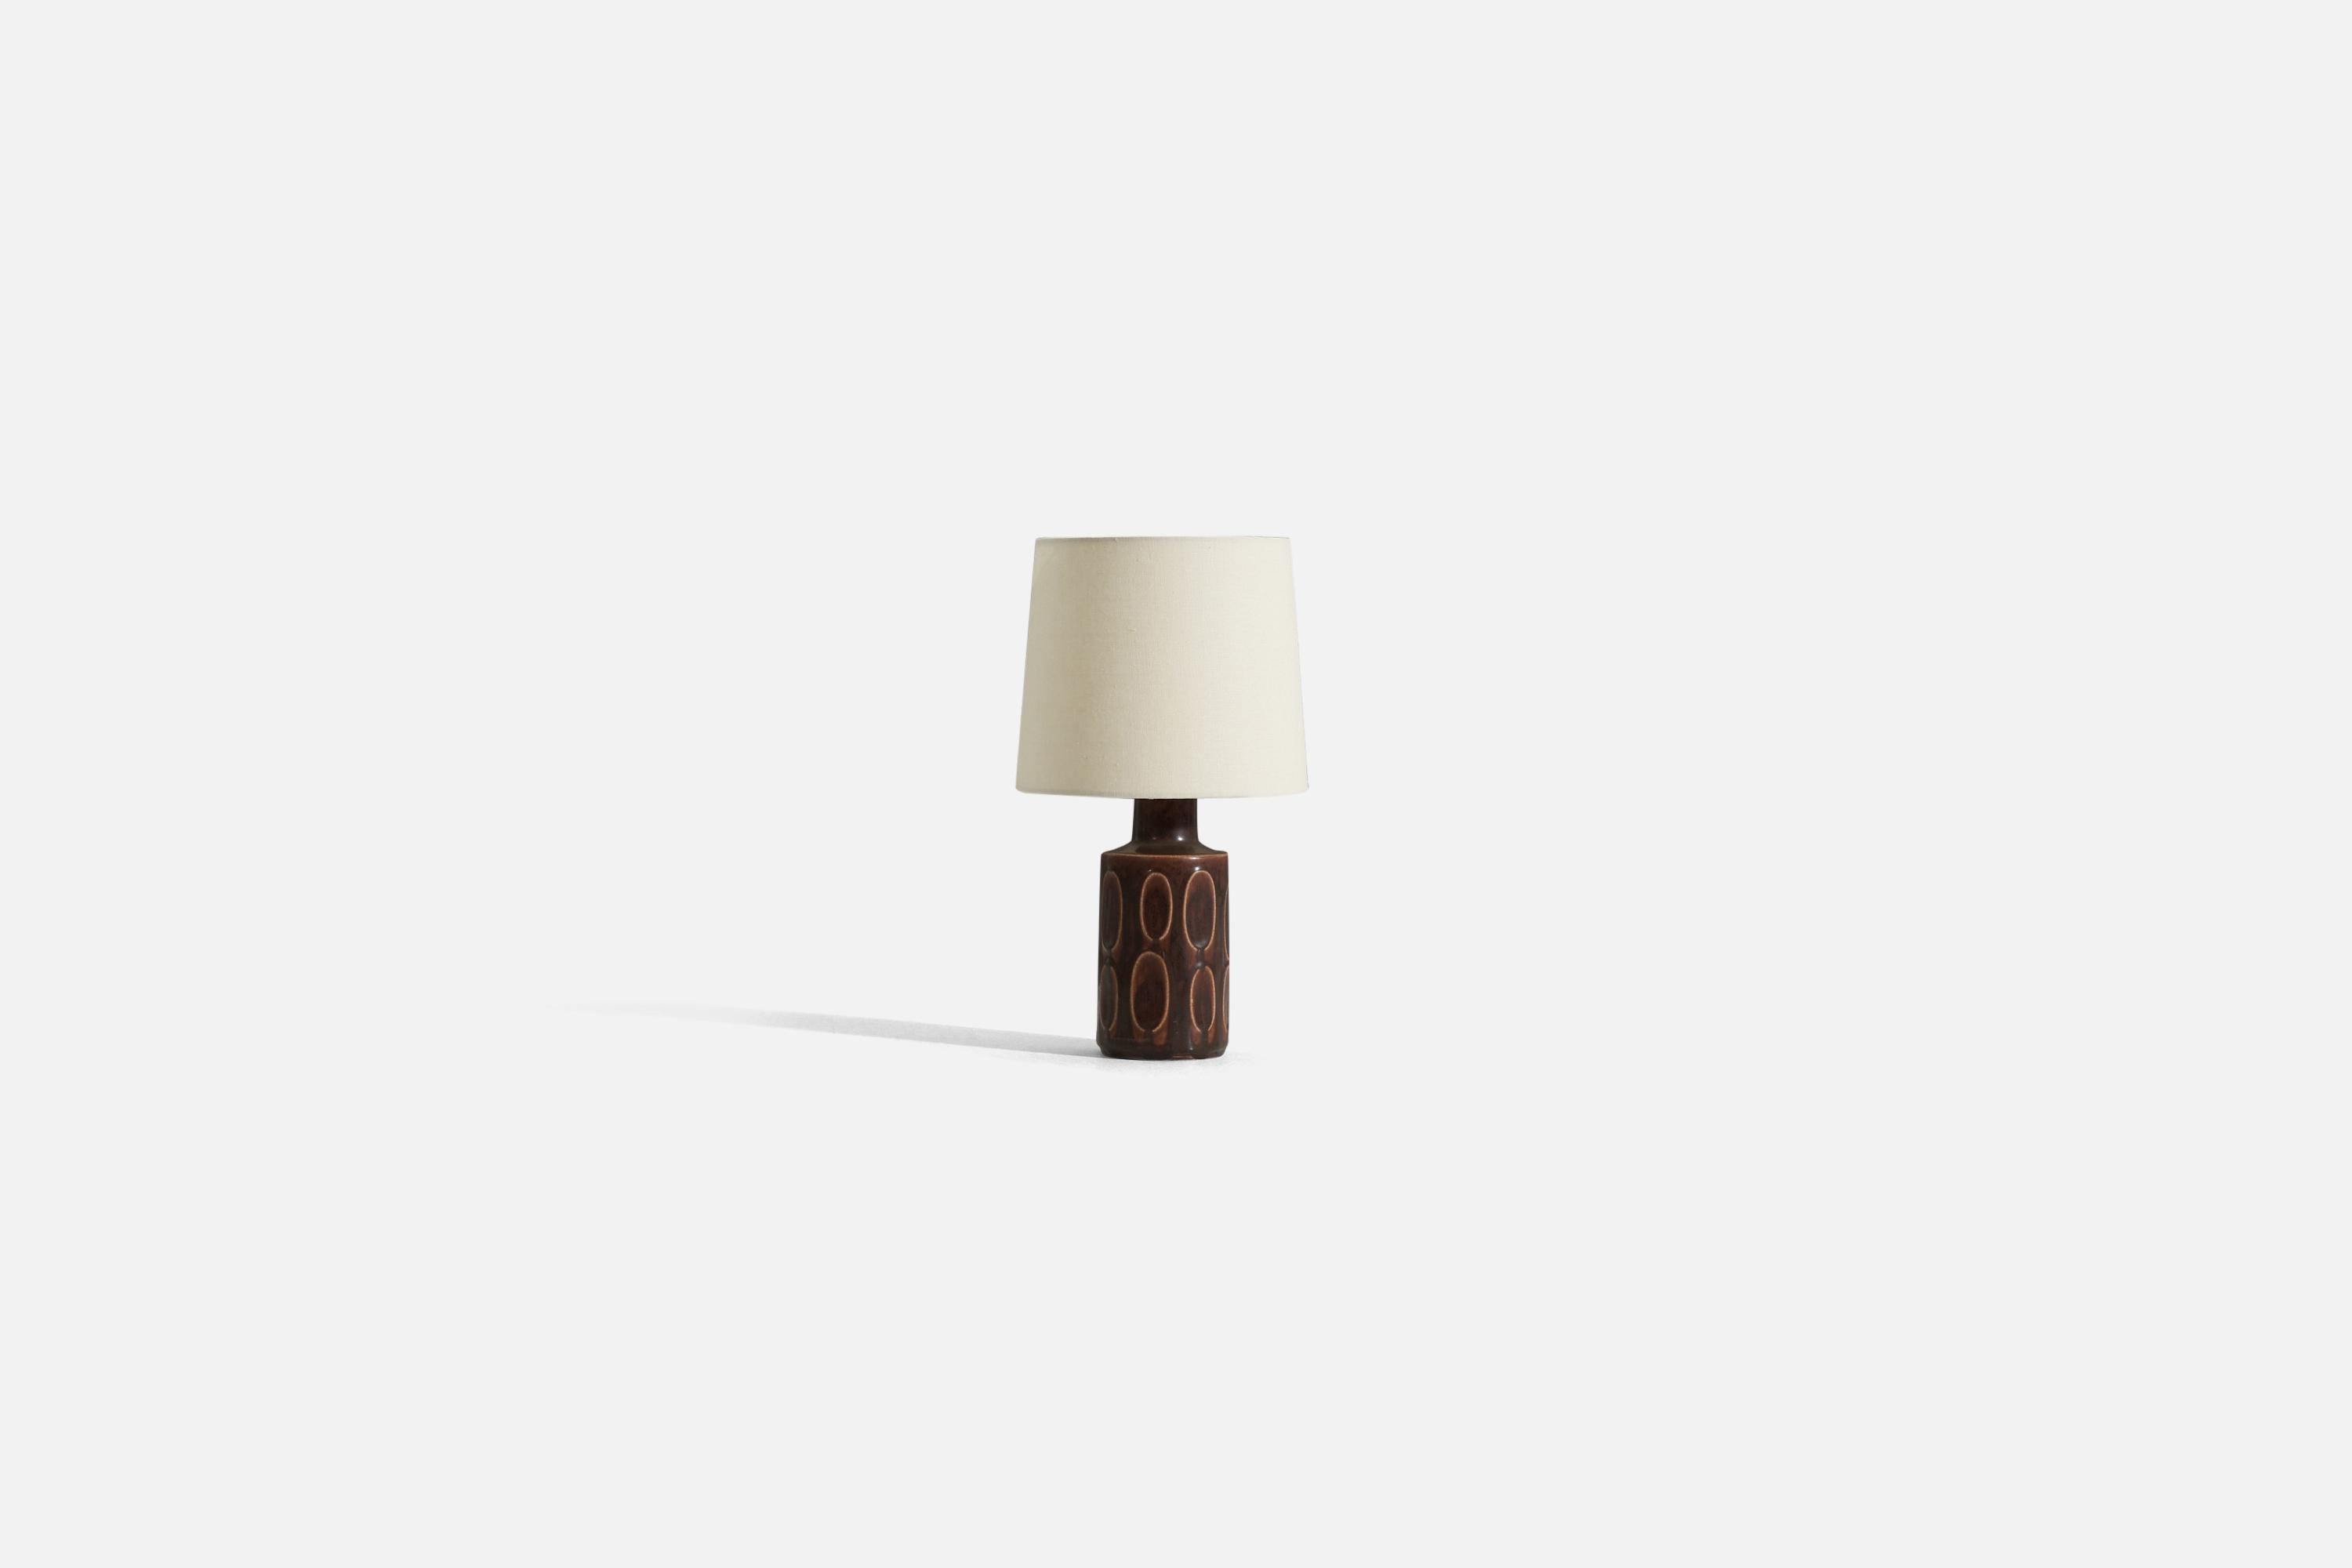 A brown-glazed stoneware table lamp, produced by Søholm Stentøj, Denmark, 1960s.

Sold without lampshade. 

Dimensions of Lamp (inches) : 10.25 x 3.75 x 3.75 (H x W x D)
Dimensions Shade (inches) : 7 x 8 x 7 (T x B x H)
Dimension of Lamp with